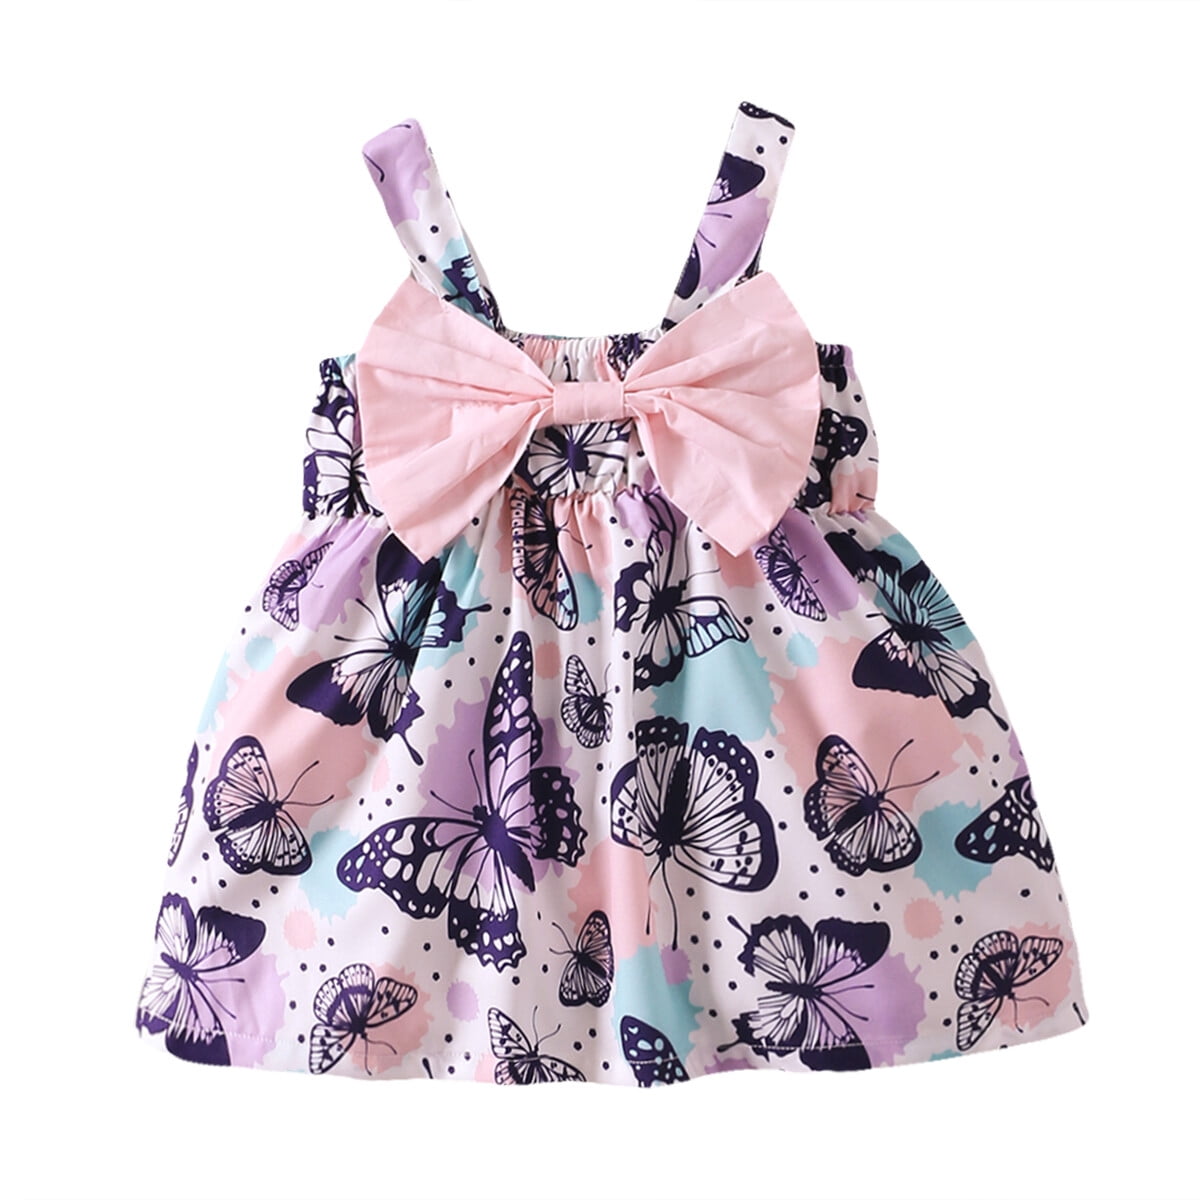 girls clothing  12 months-8T children's clothing 